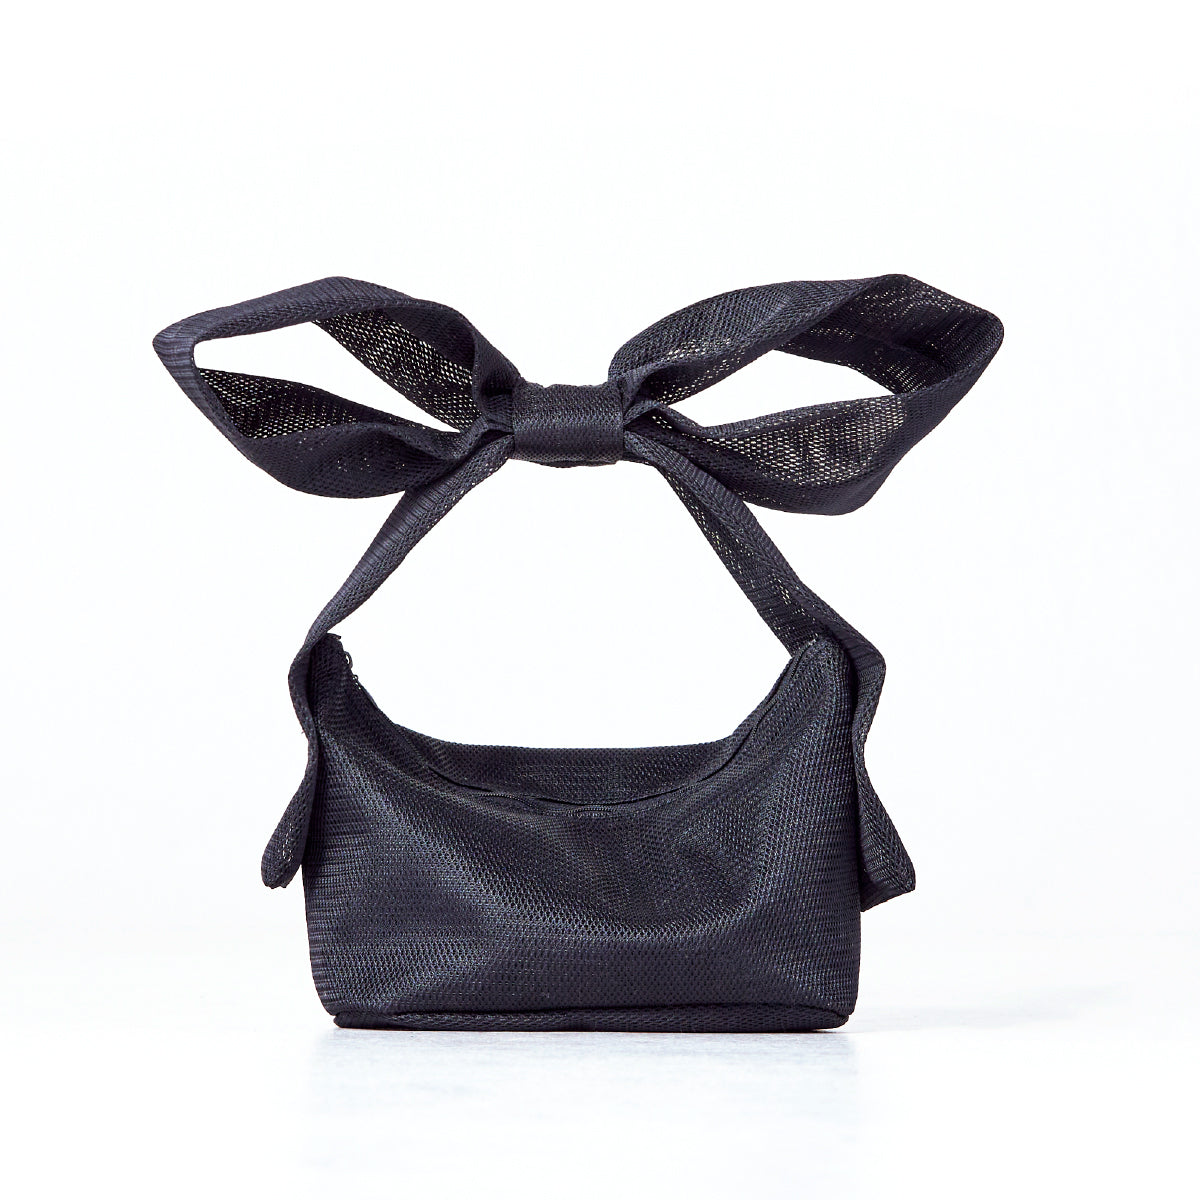 No:H-294_BLACK | Name:bonbonbutterfly tote PU leather S | Color:Black【HELOYSE_エロイーズ】【入荷予定アイテム・入荷連絡可能】